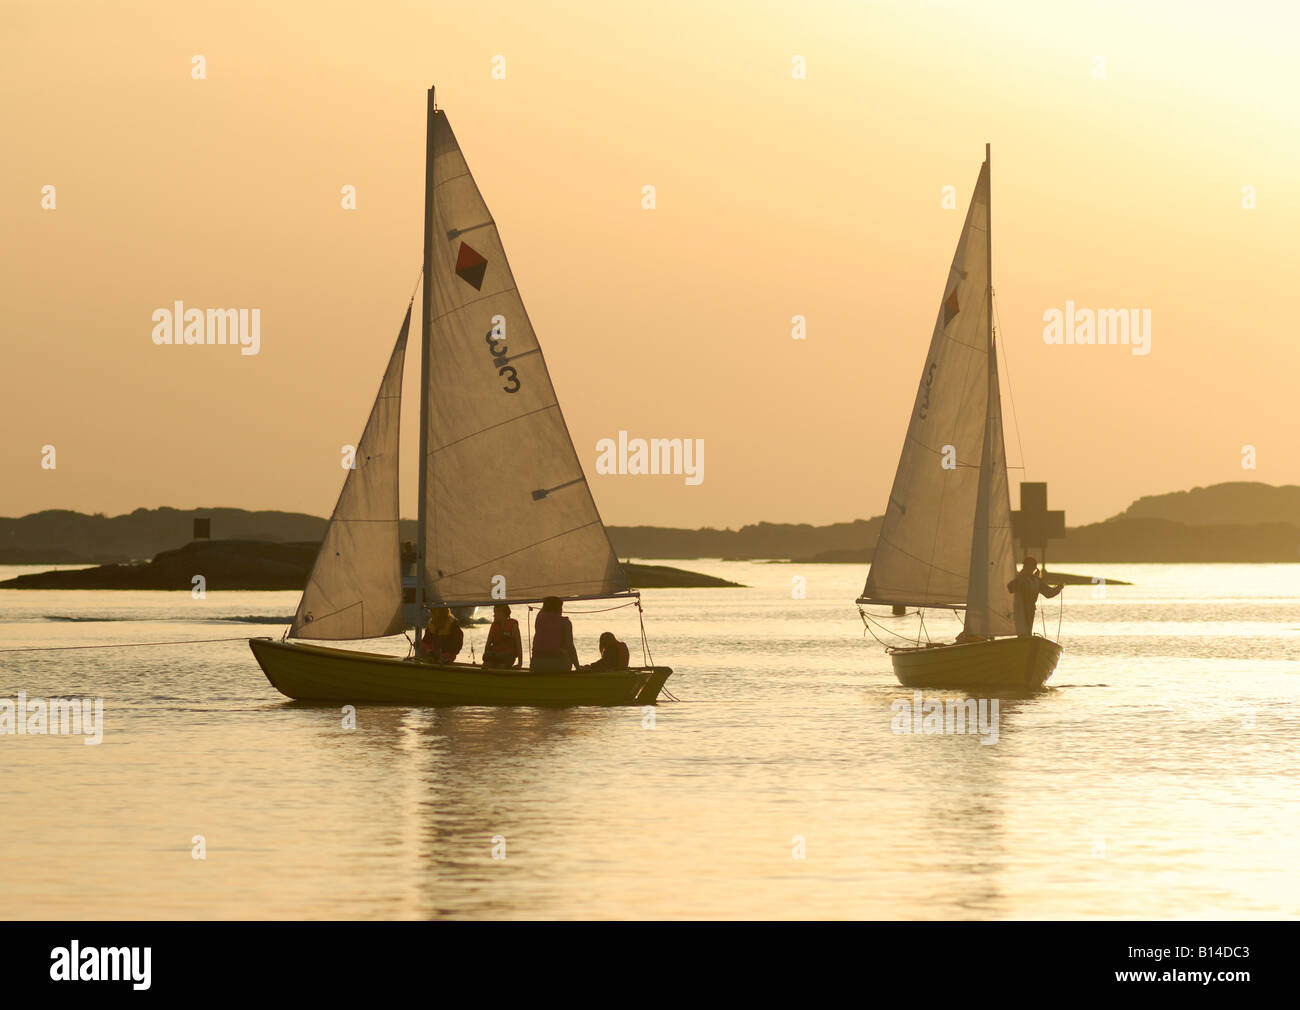 Two sailing boats at dusk, Sweden, west coast Stock Photo